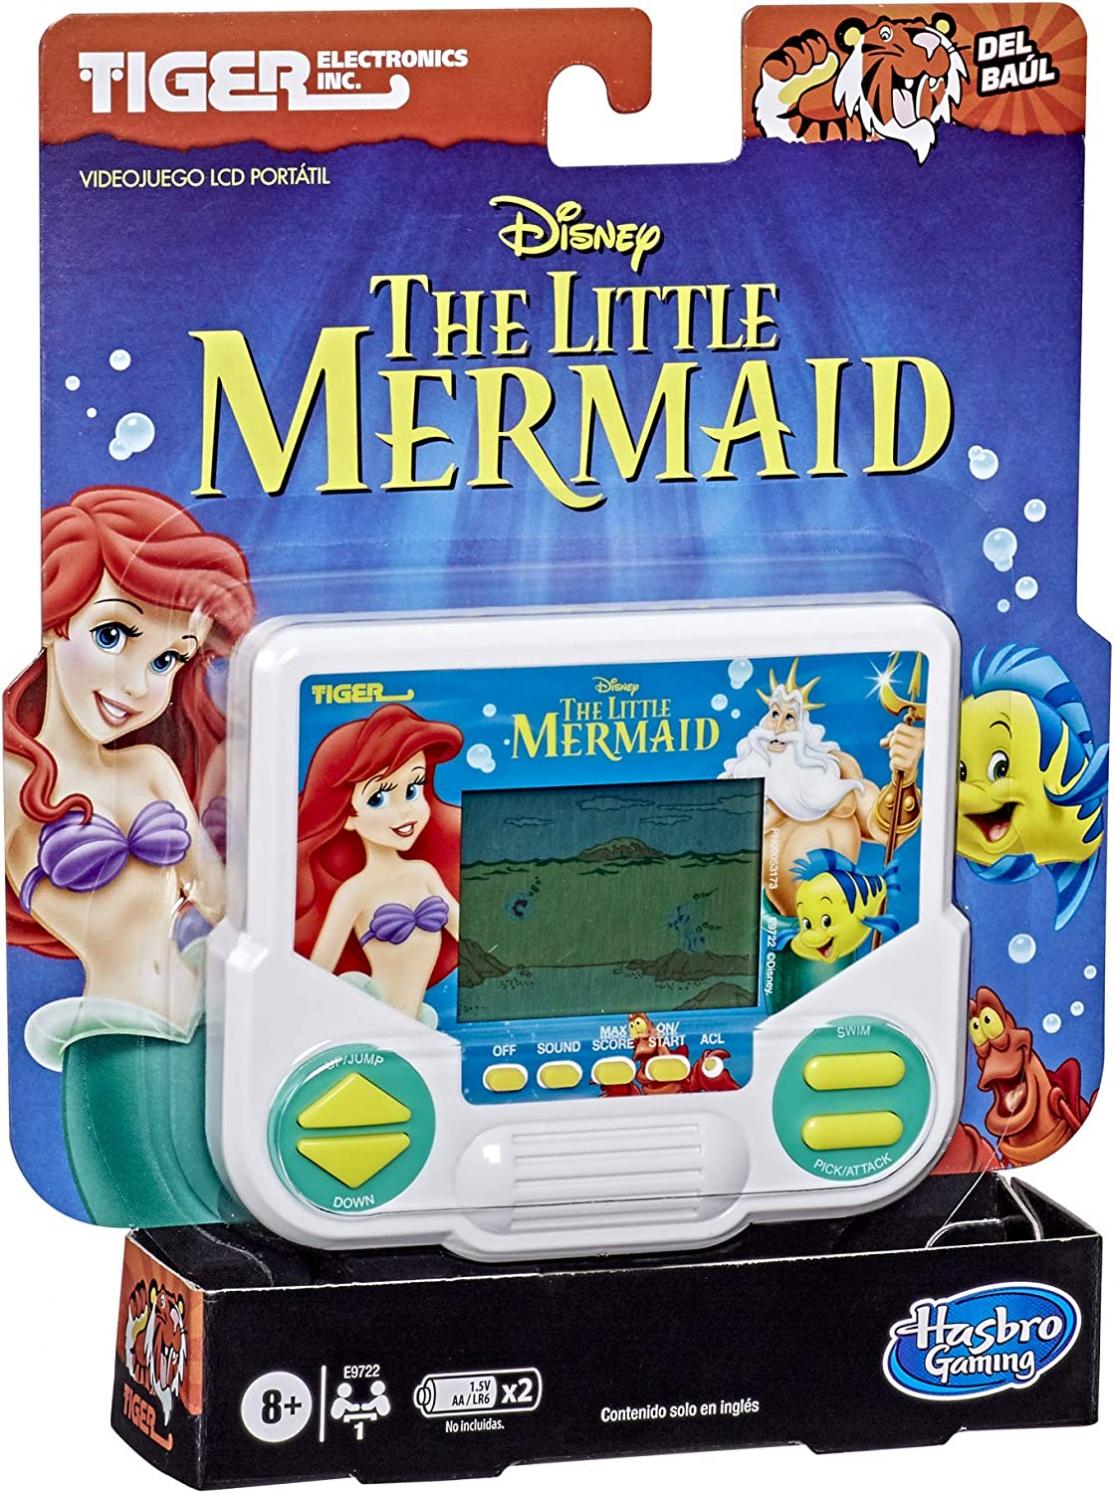 Hasbro Gaming Tiger Electronics Disney's The Little Mermaid Electronic LCD Video Game, Retro-Inspired Edition, Handheld 1-Player Game, Ages 8 and Up , Blue